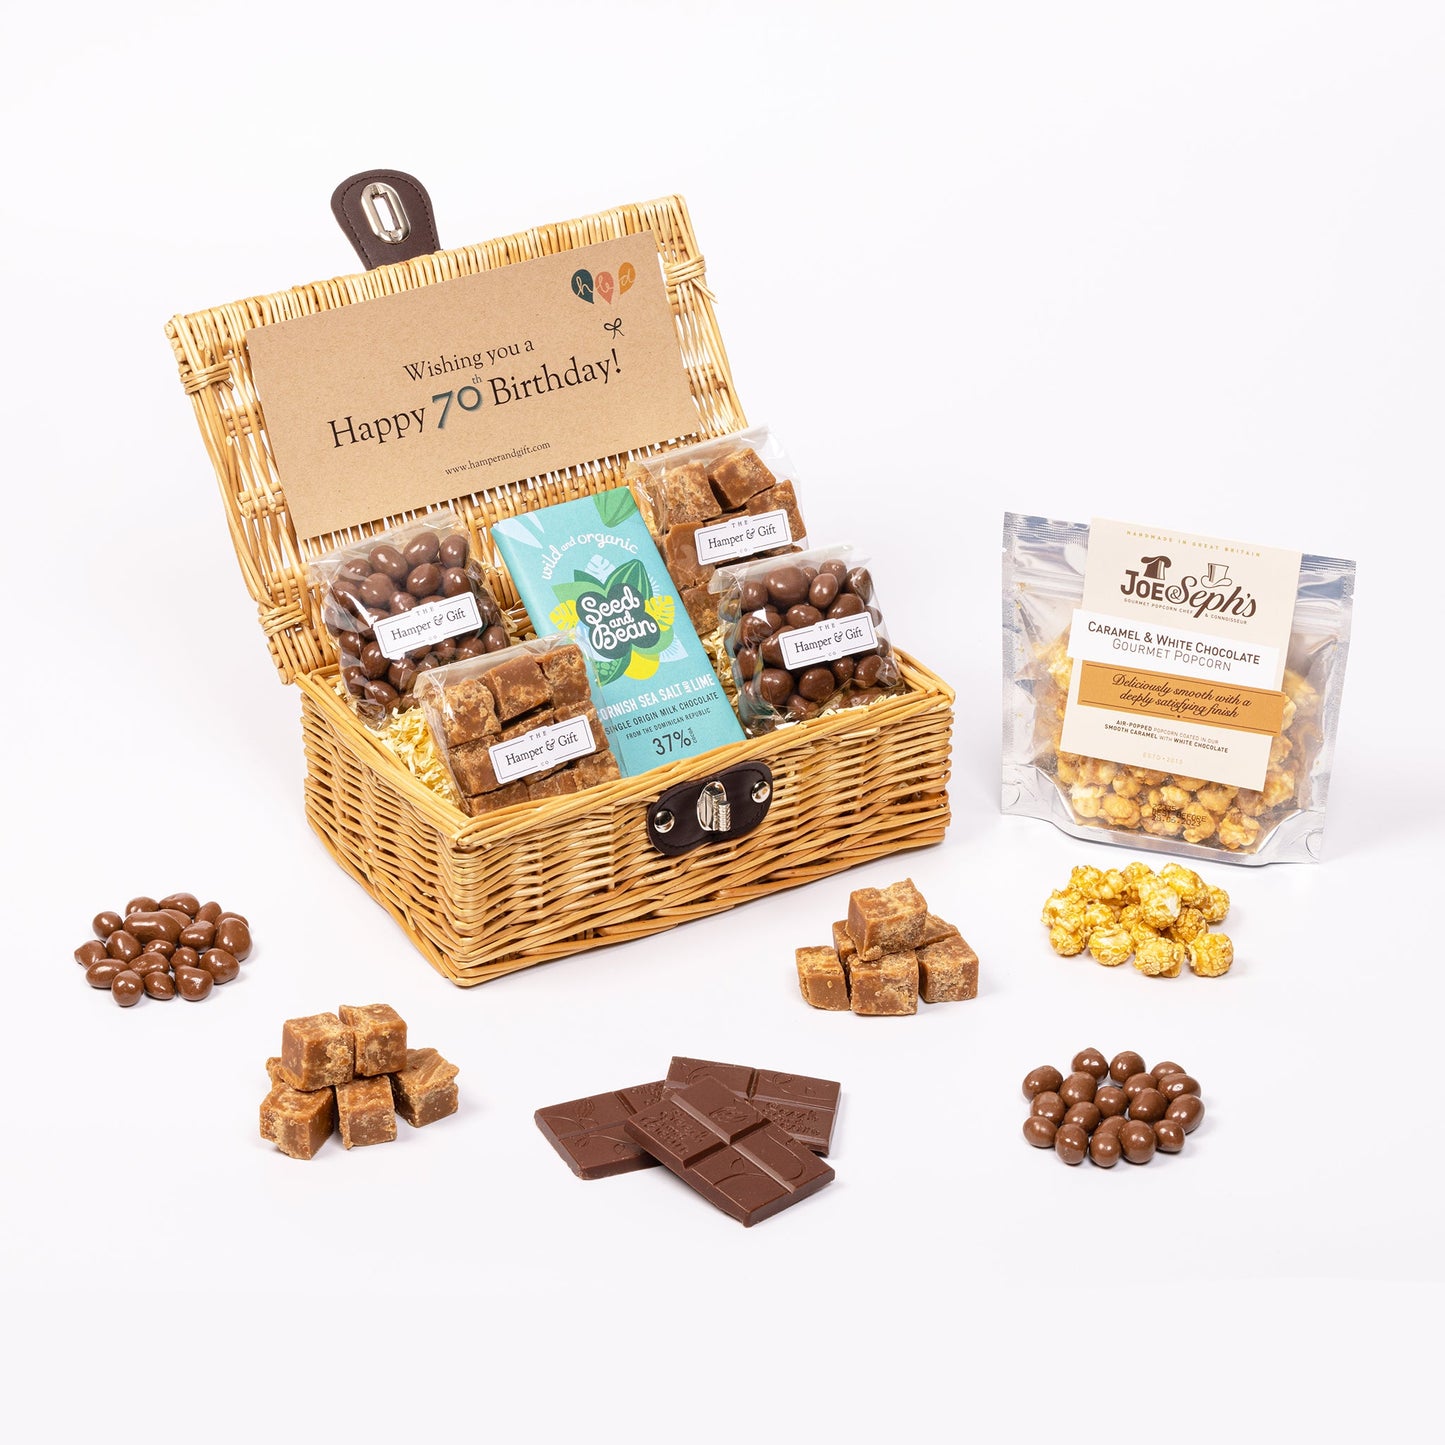 70th Birthday Hamper filled with chocolate, fudge and gourmet popcorn with scattered confectionery